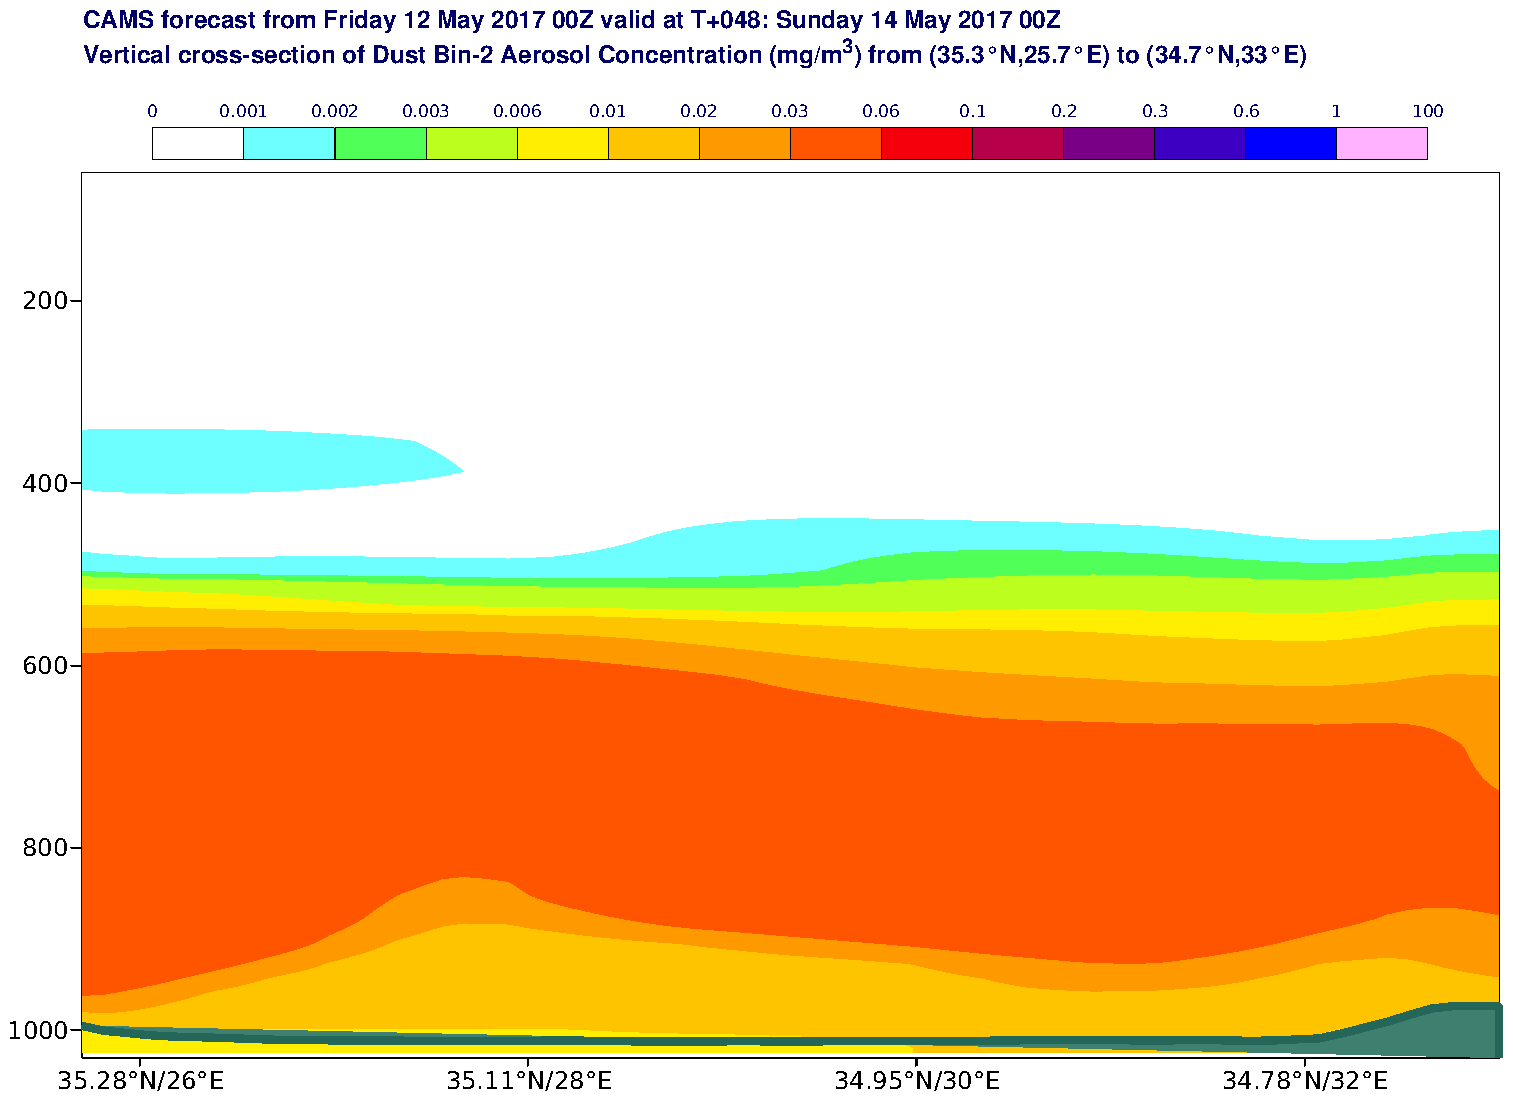 Vertical cross-section of Dust Bin-2 Aerosol Concentration (mg/m3) valid at T48 - 2017-05-14 00:00